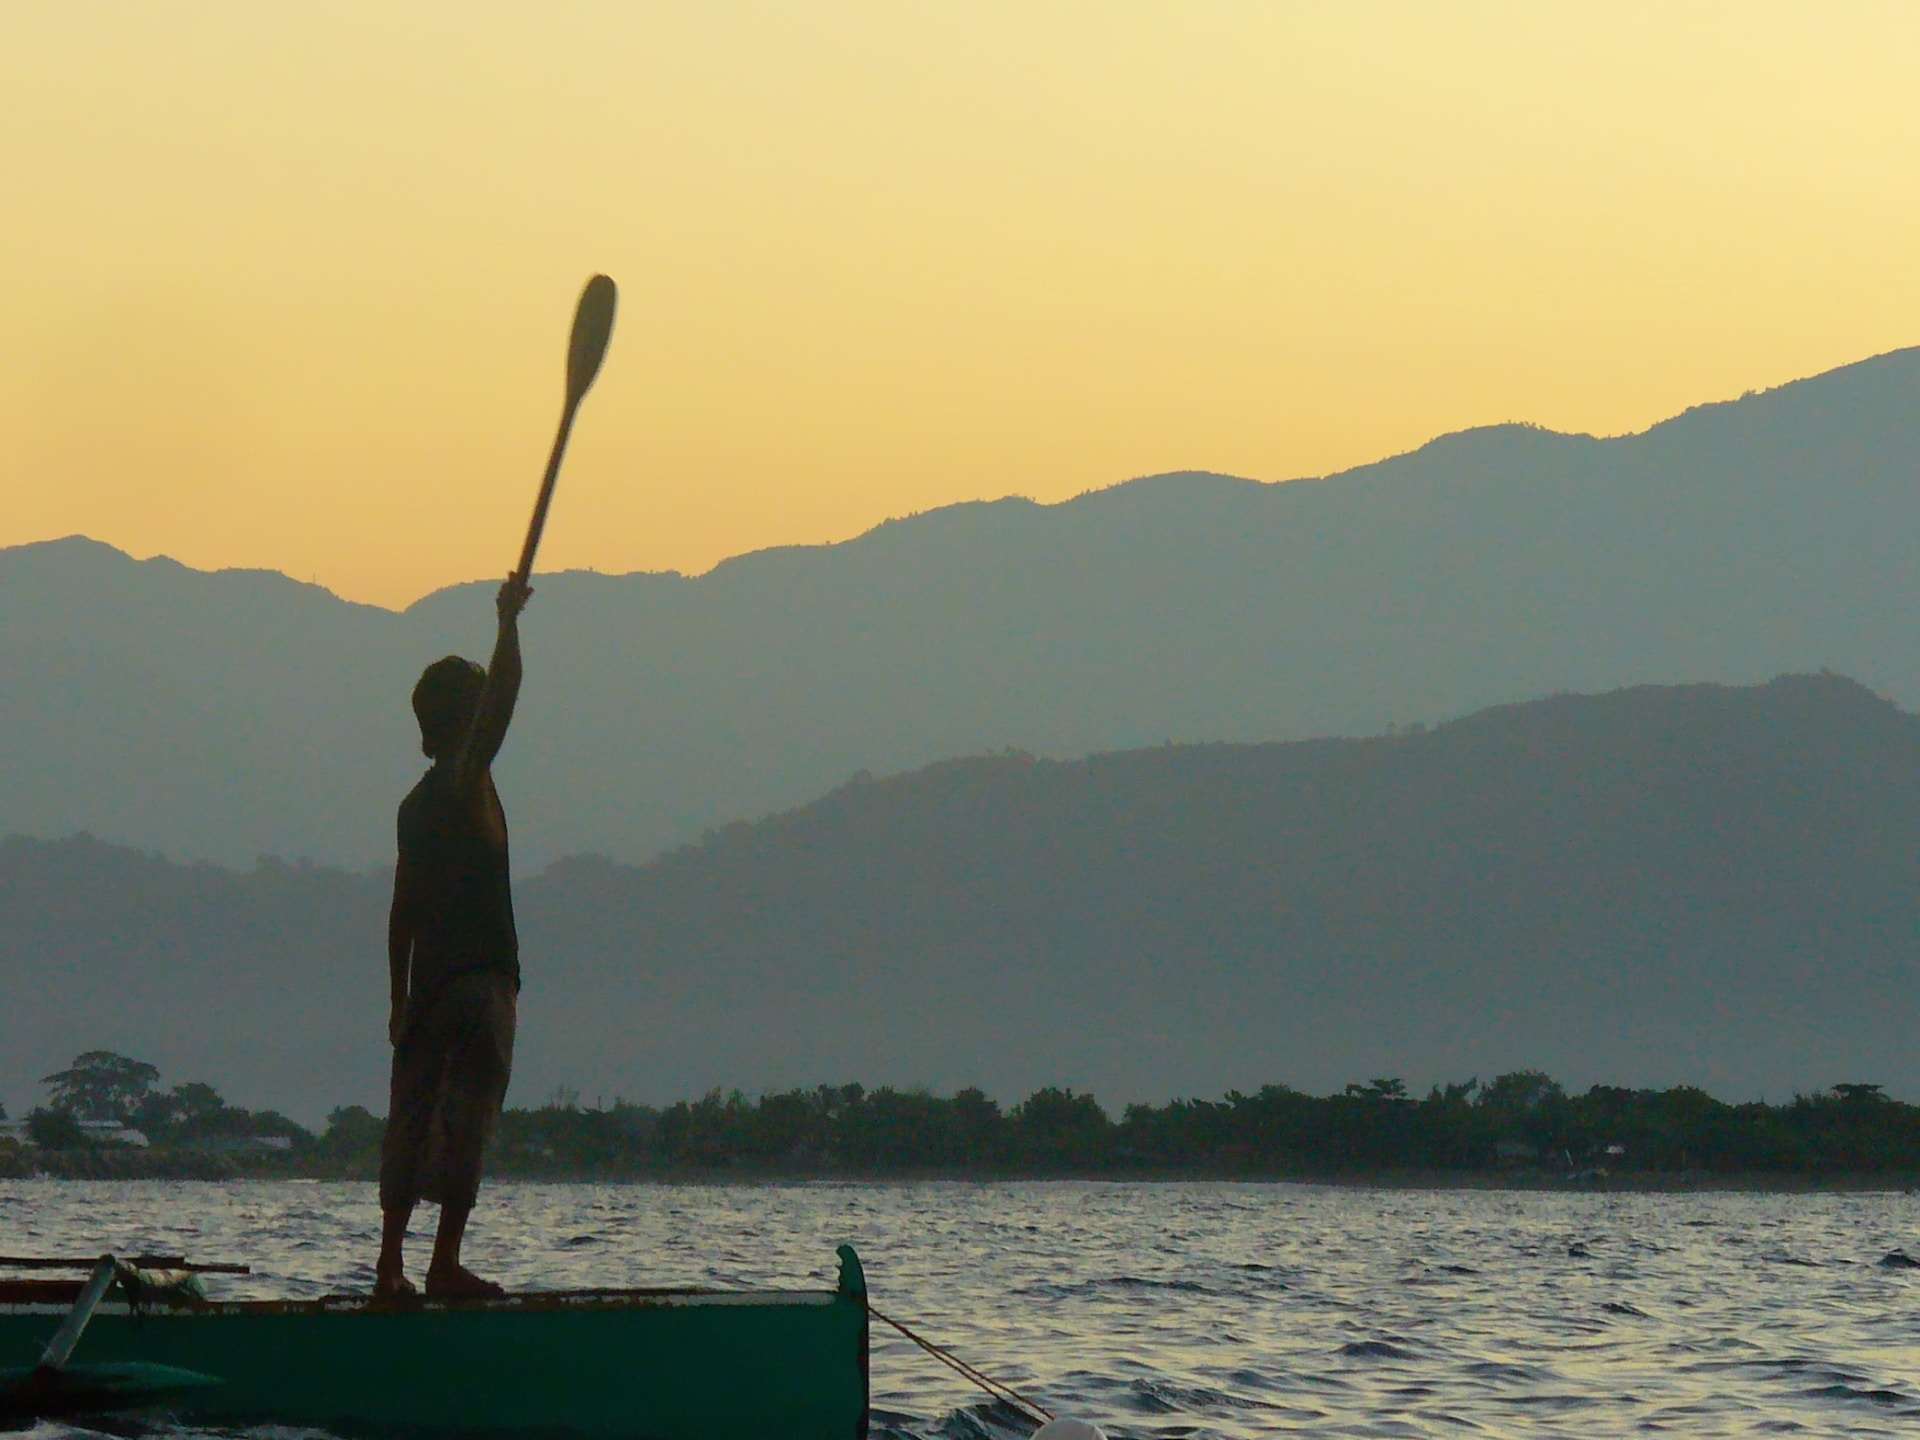 Silhouette of a statue and mountains in the Philippines' South China Sea